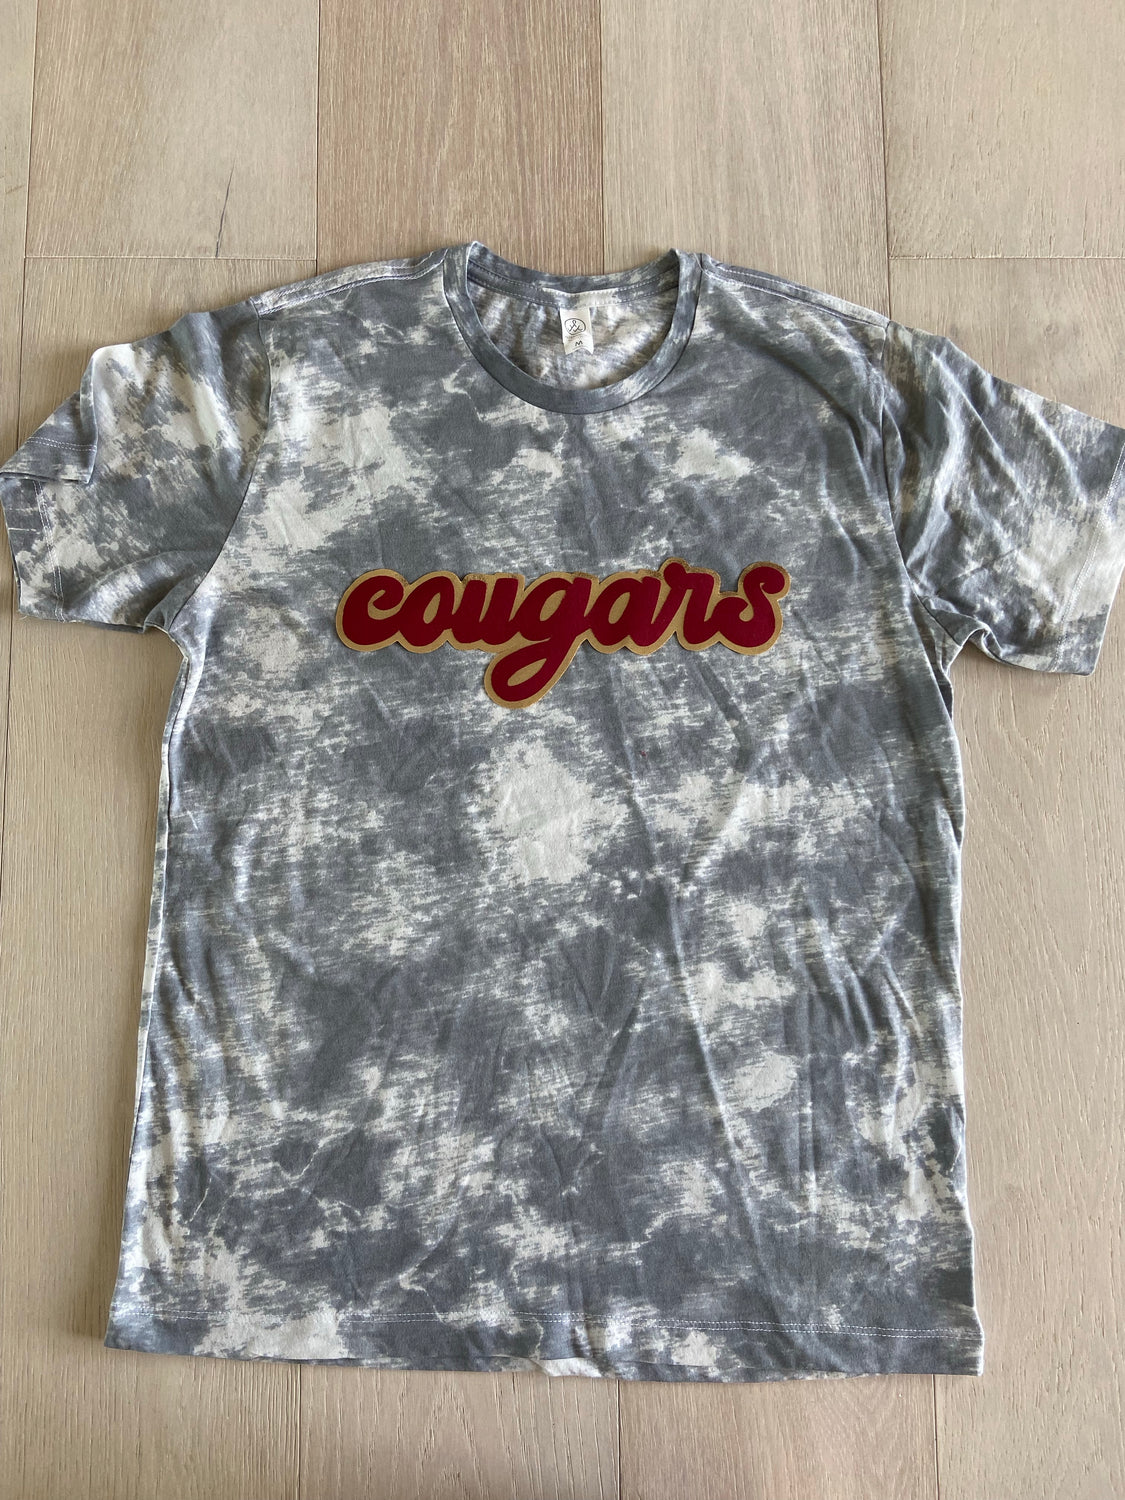 COUGARS - GREY DYED TEE